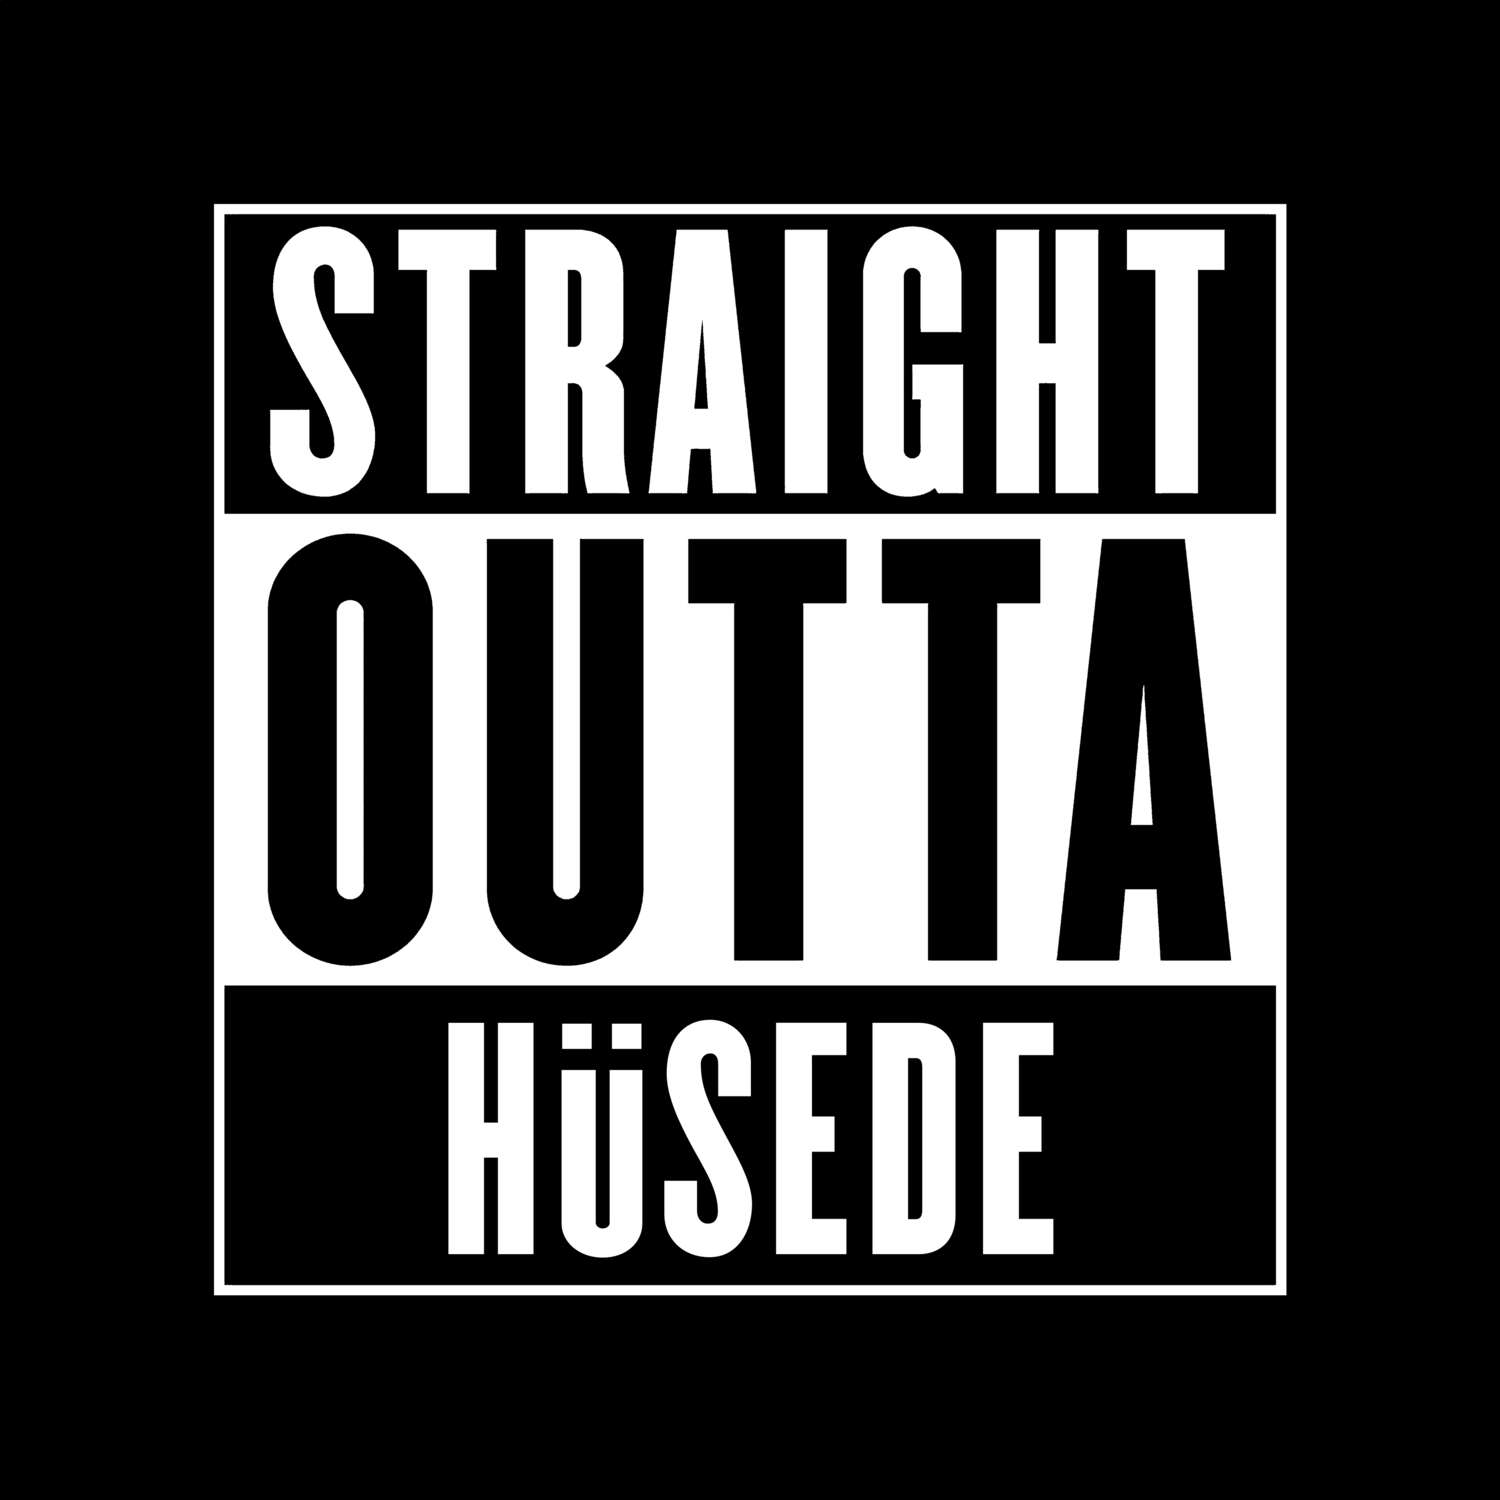 Hüsede T-Shirt »Straight Outta«